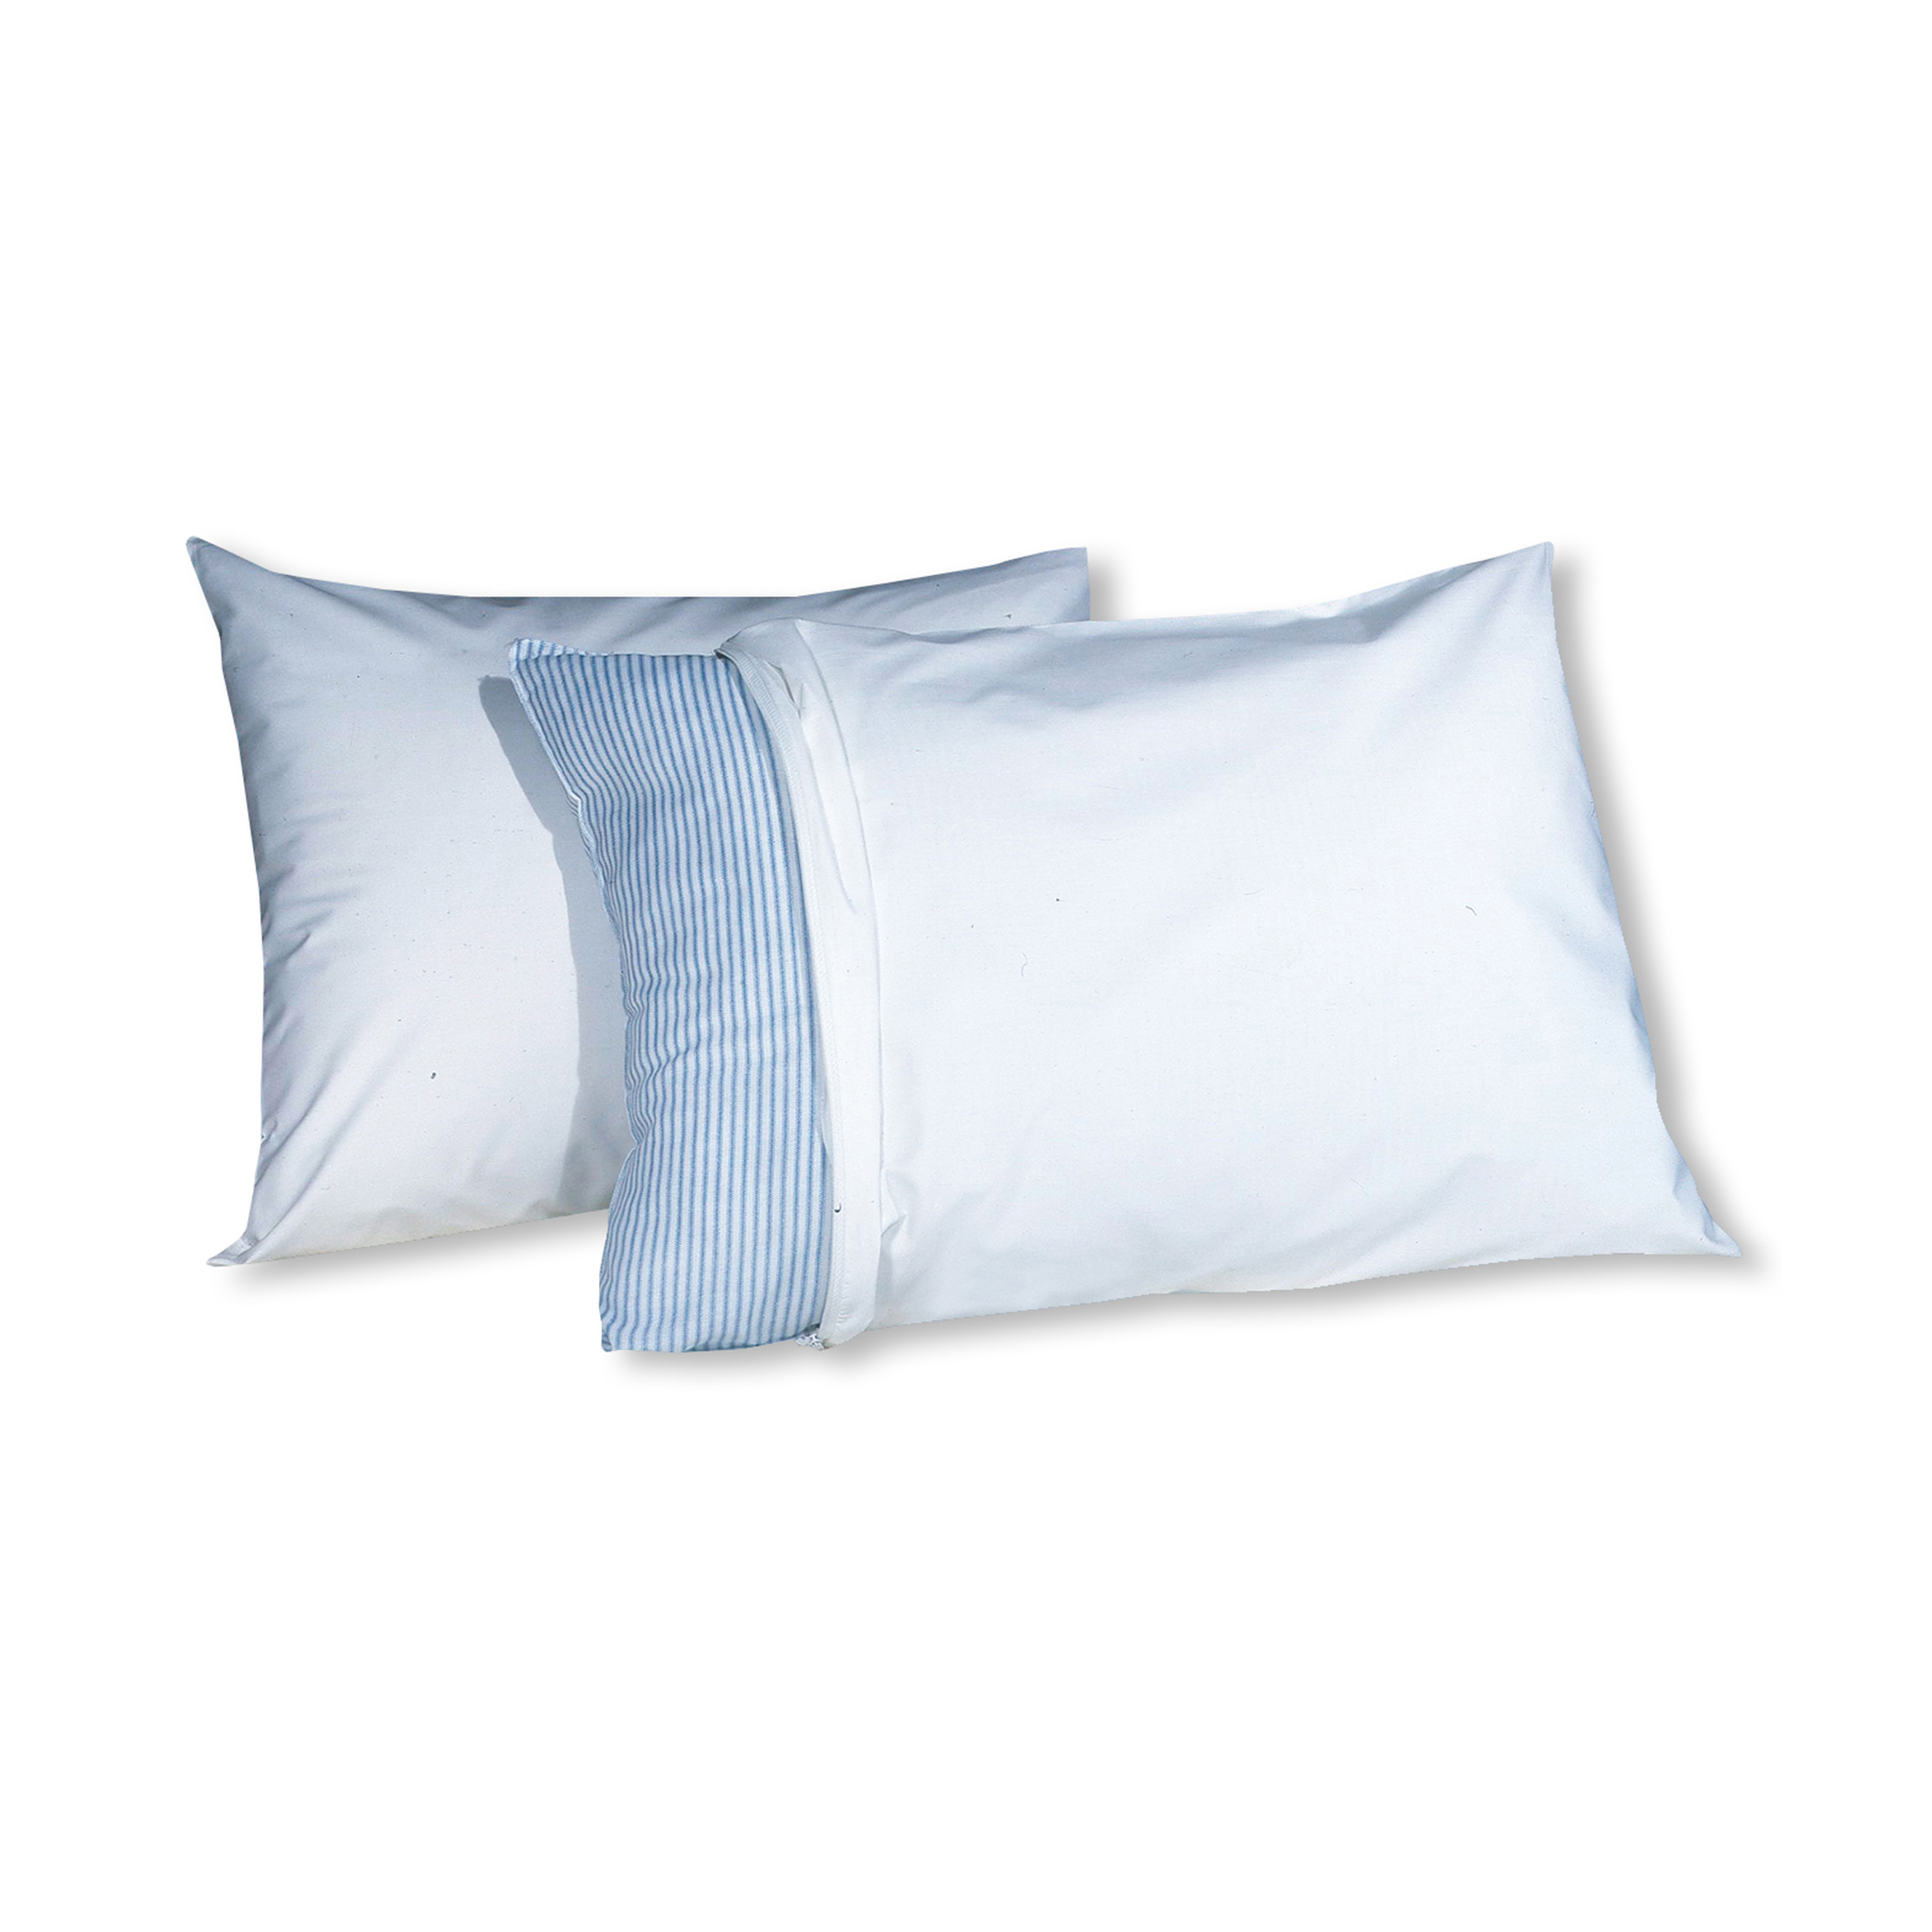 Pillow Guard Allergy Relief Water Resistant Zippered Pillow Protectors, Standard, 2 Pack - image 5 of 7